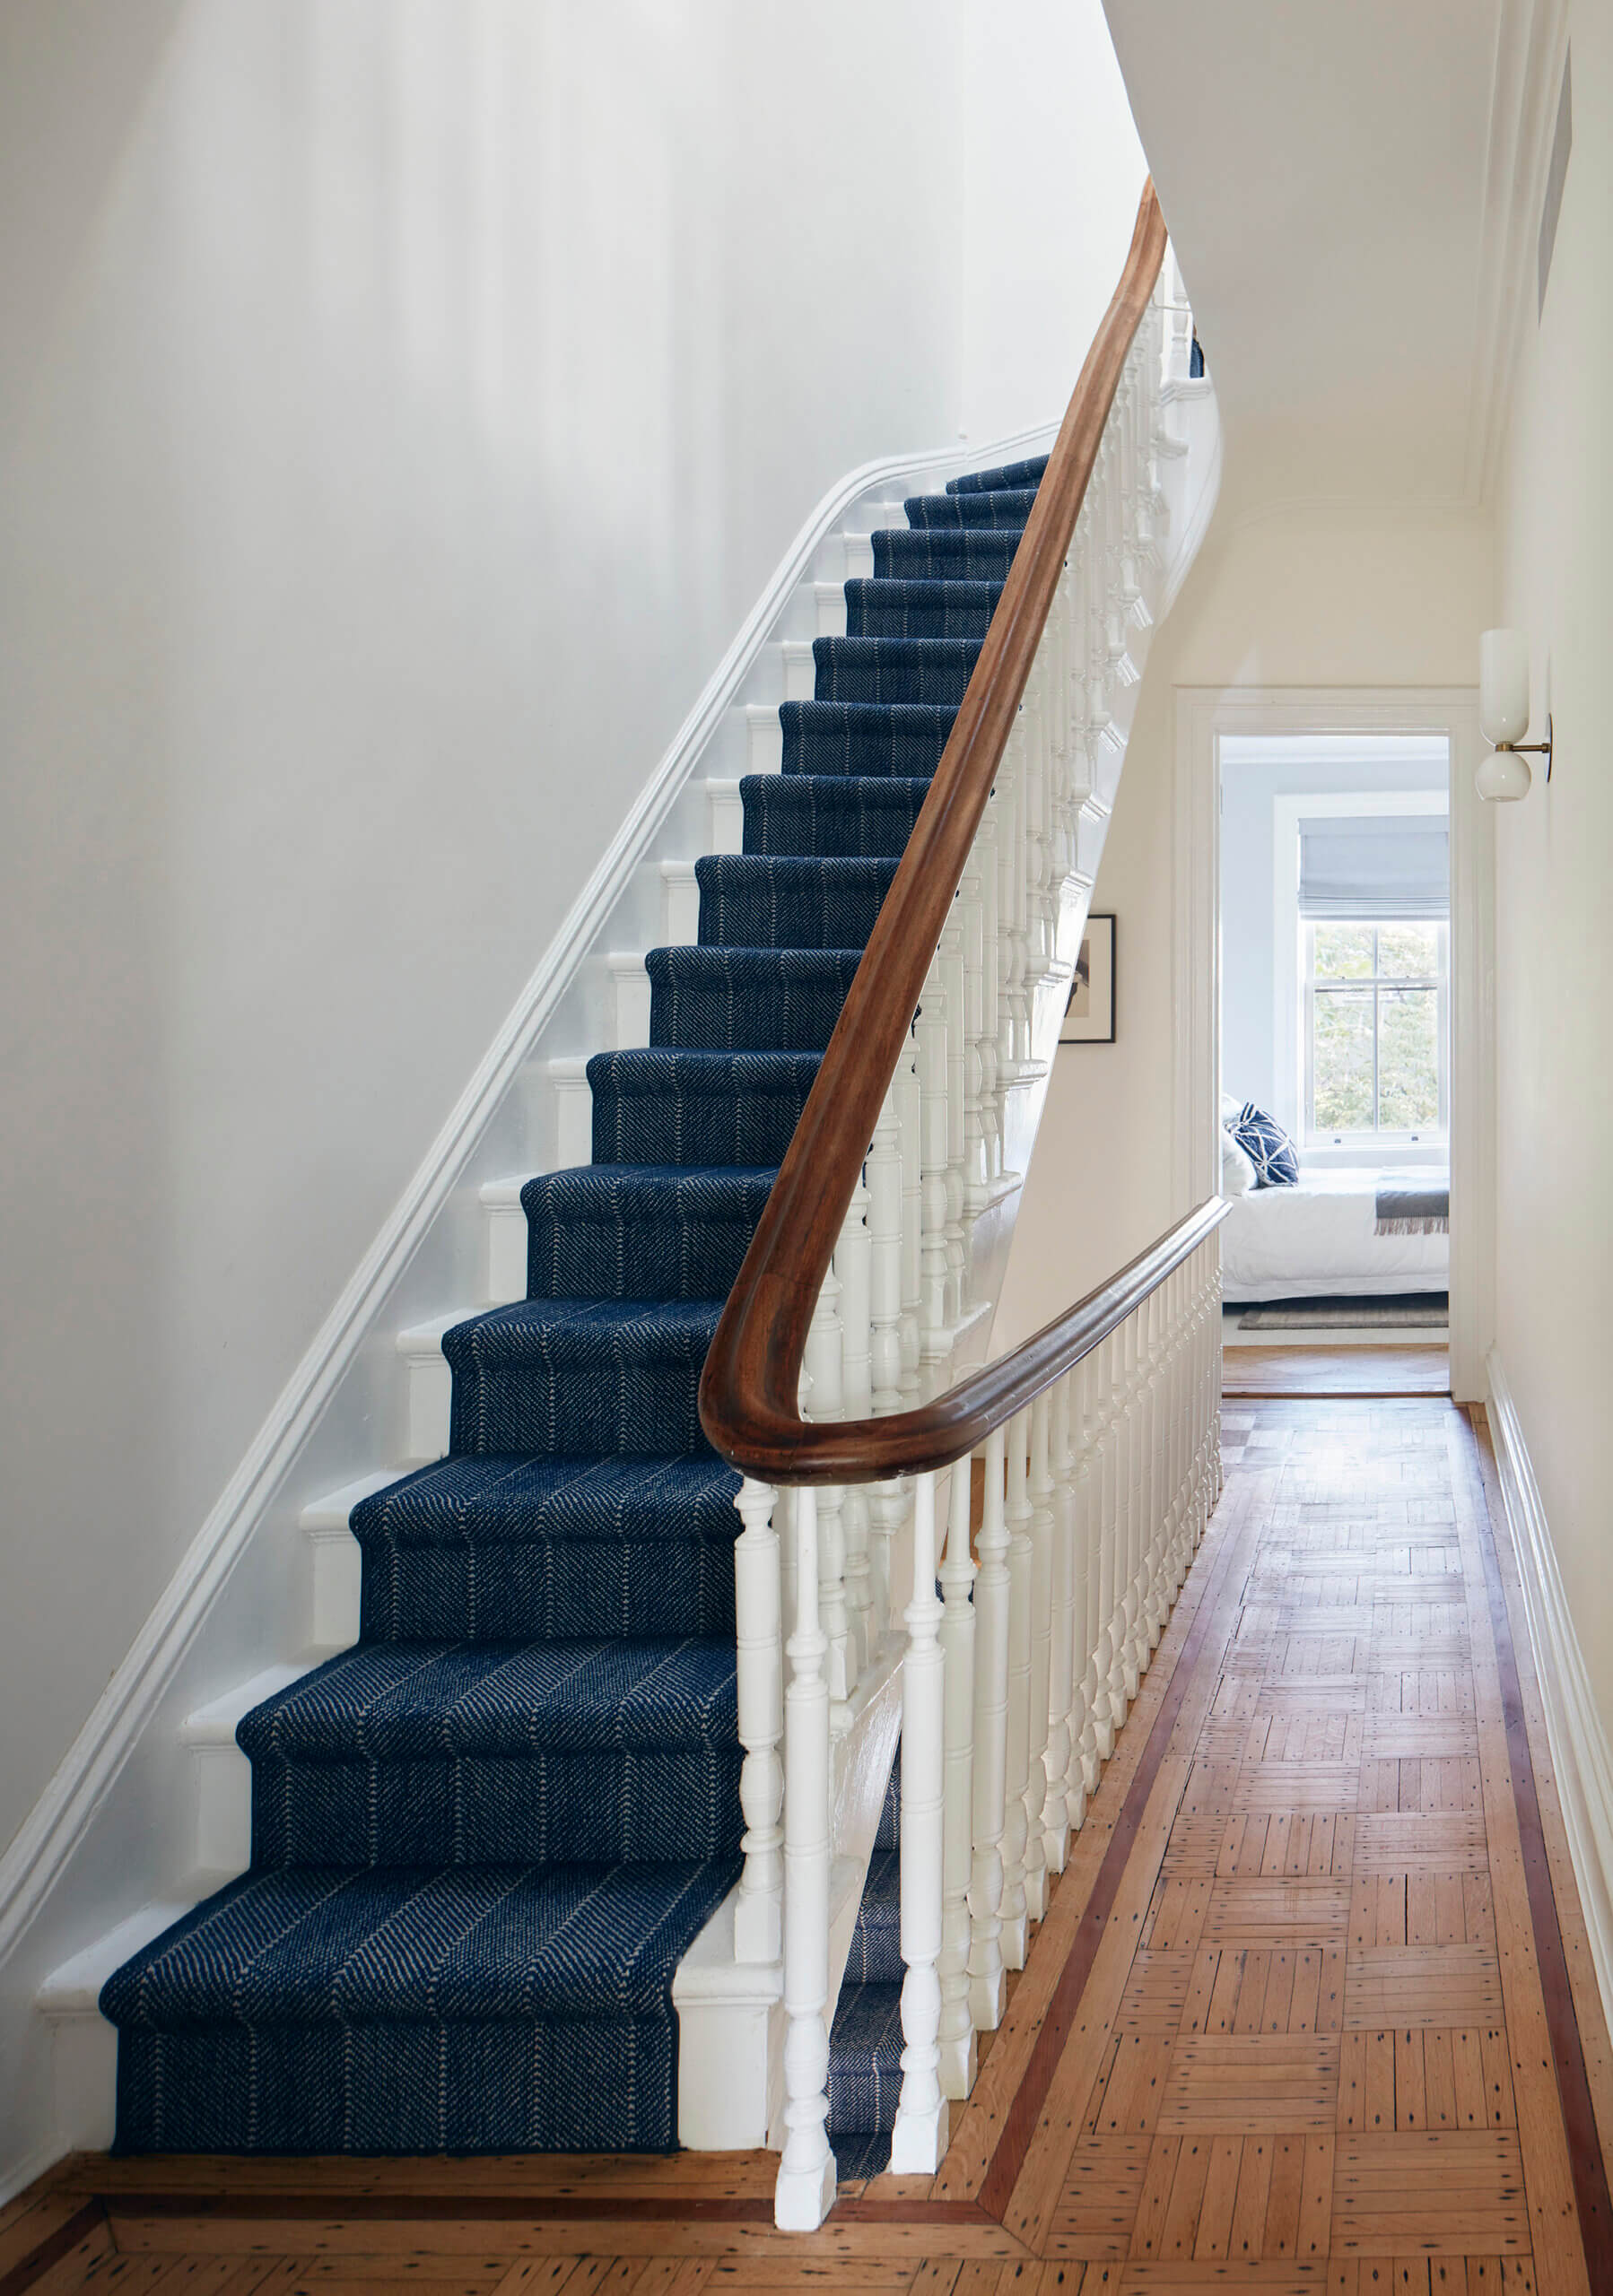 STAIR painted white with blue runner